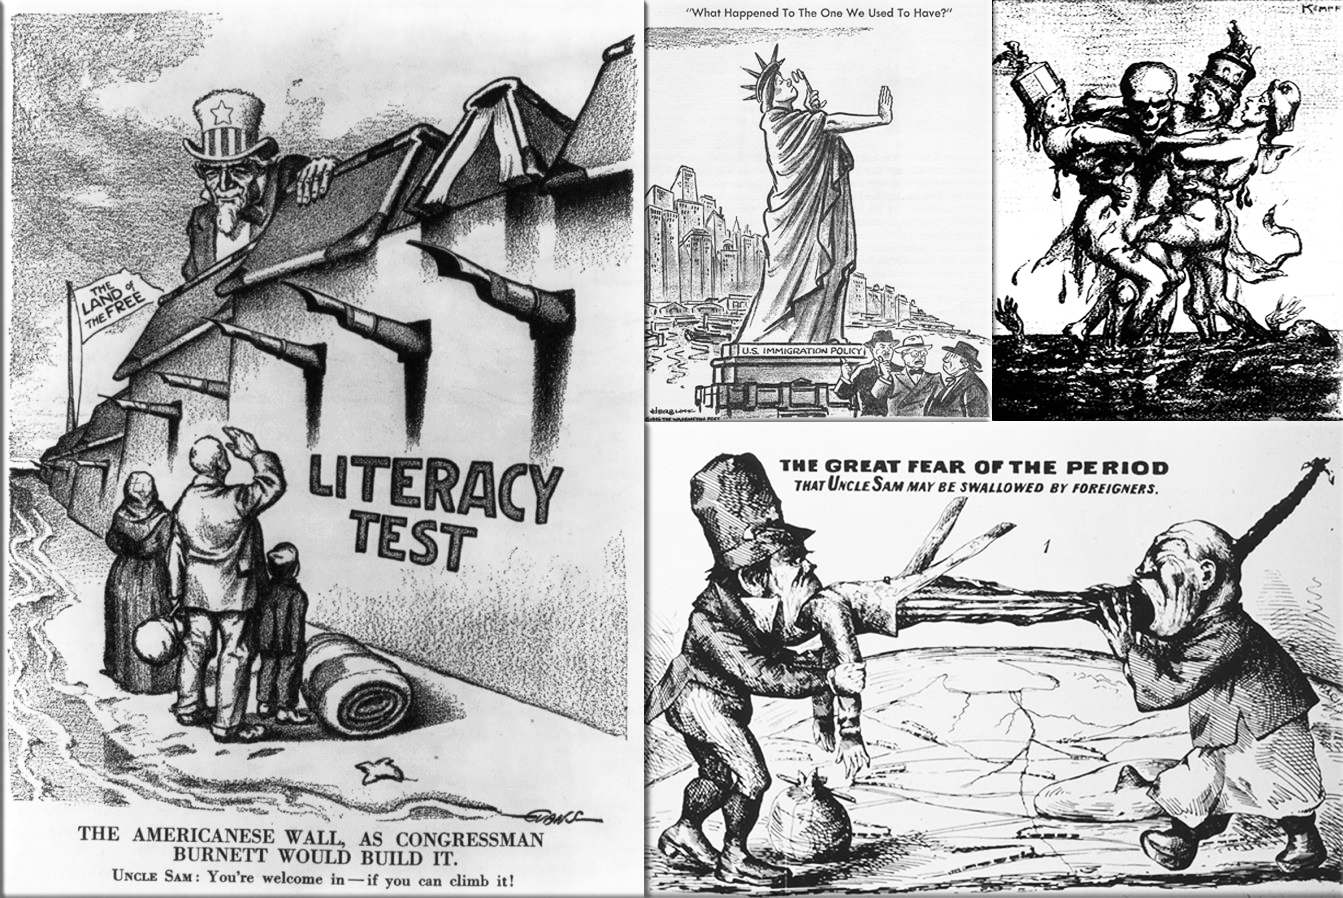 Congress of the United States passes the Immigration Act of 1917 over President Woodrow Wilson's veto on February 05, 1917